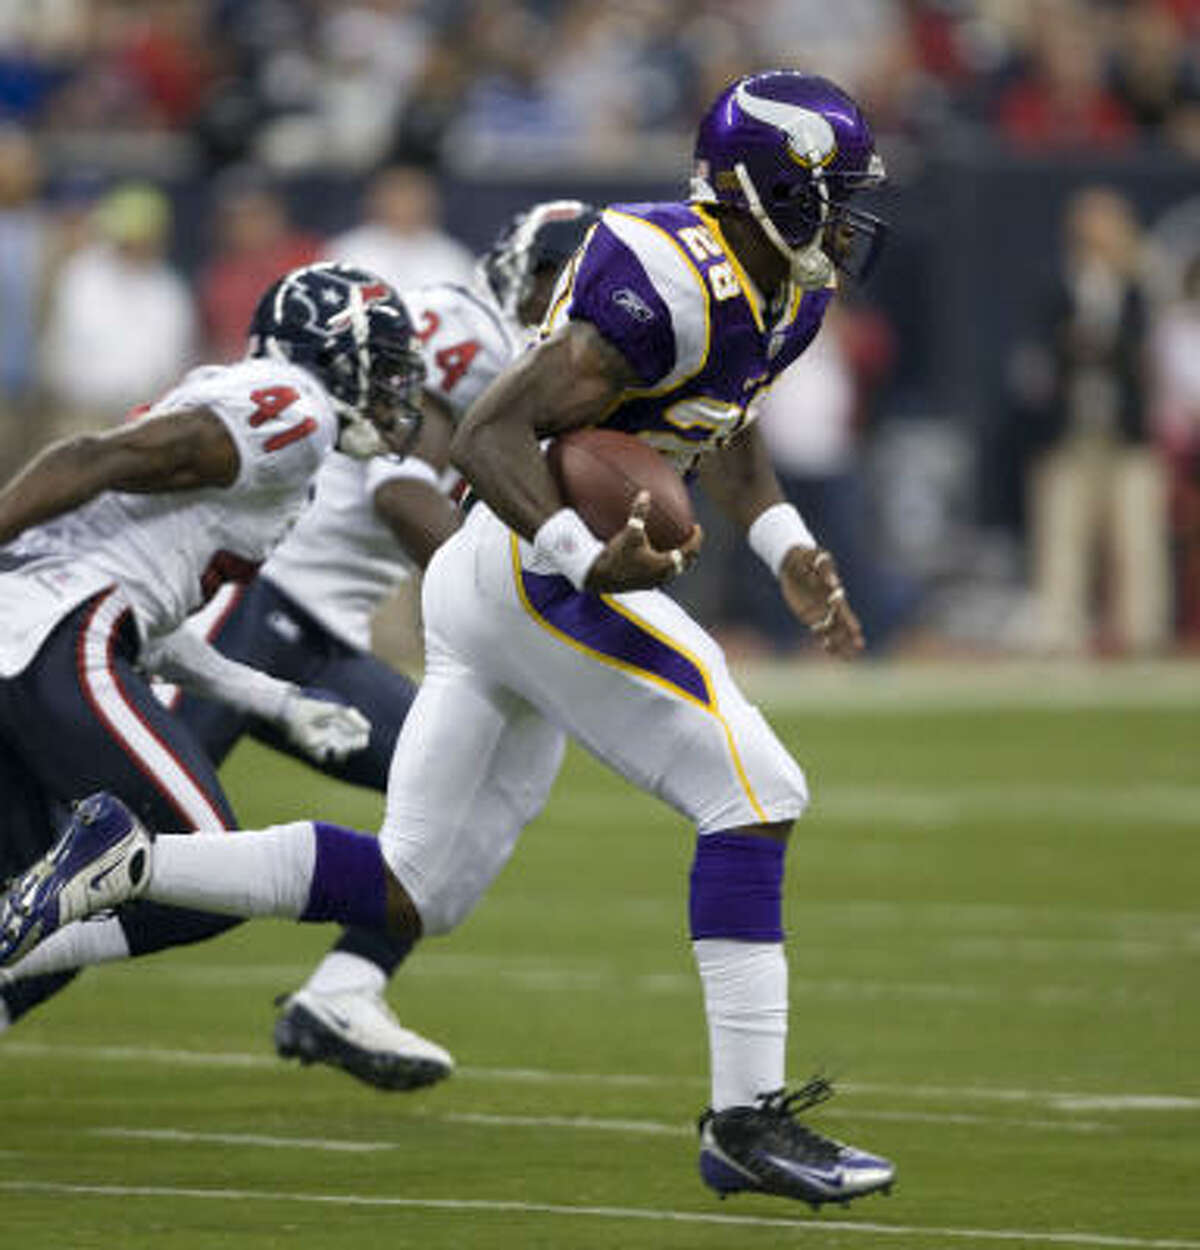 Minnesota Vikings running back Adrian Peterson races past Texans cornerback Brice McCain on his way to a 75-yard touchdown run on the first play from scrimmage.